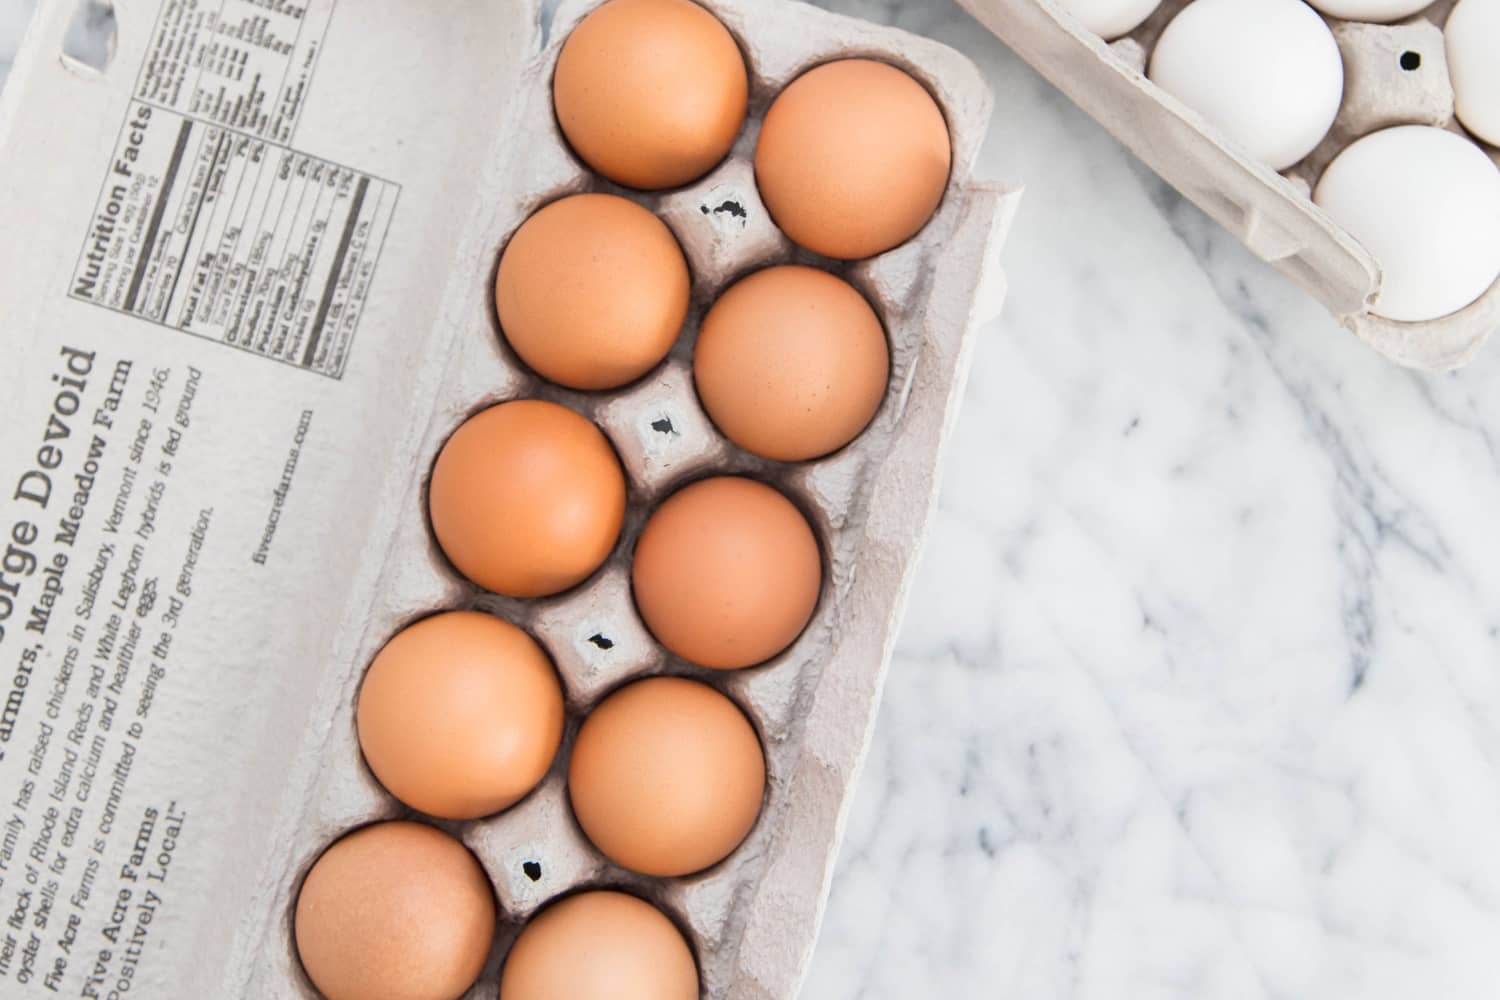 Brown & White Eggs: Is There a Difference? | Kitchn